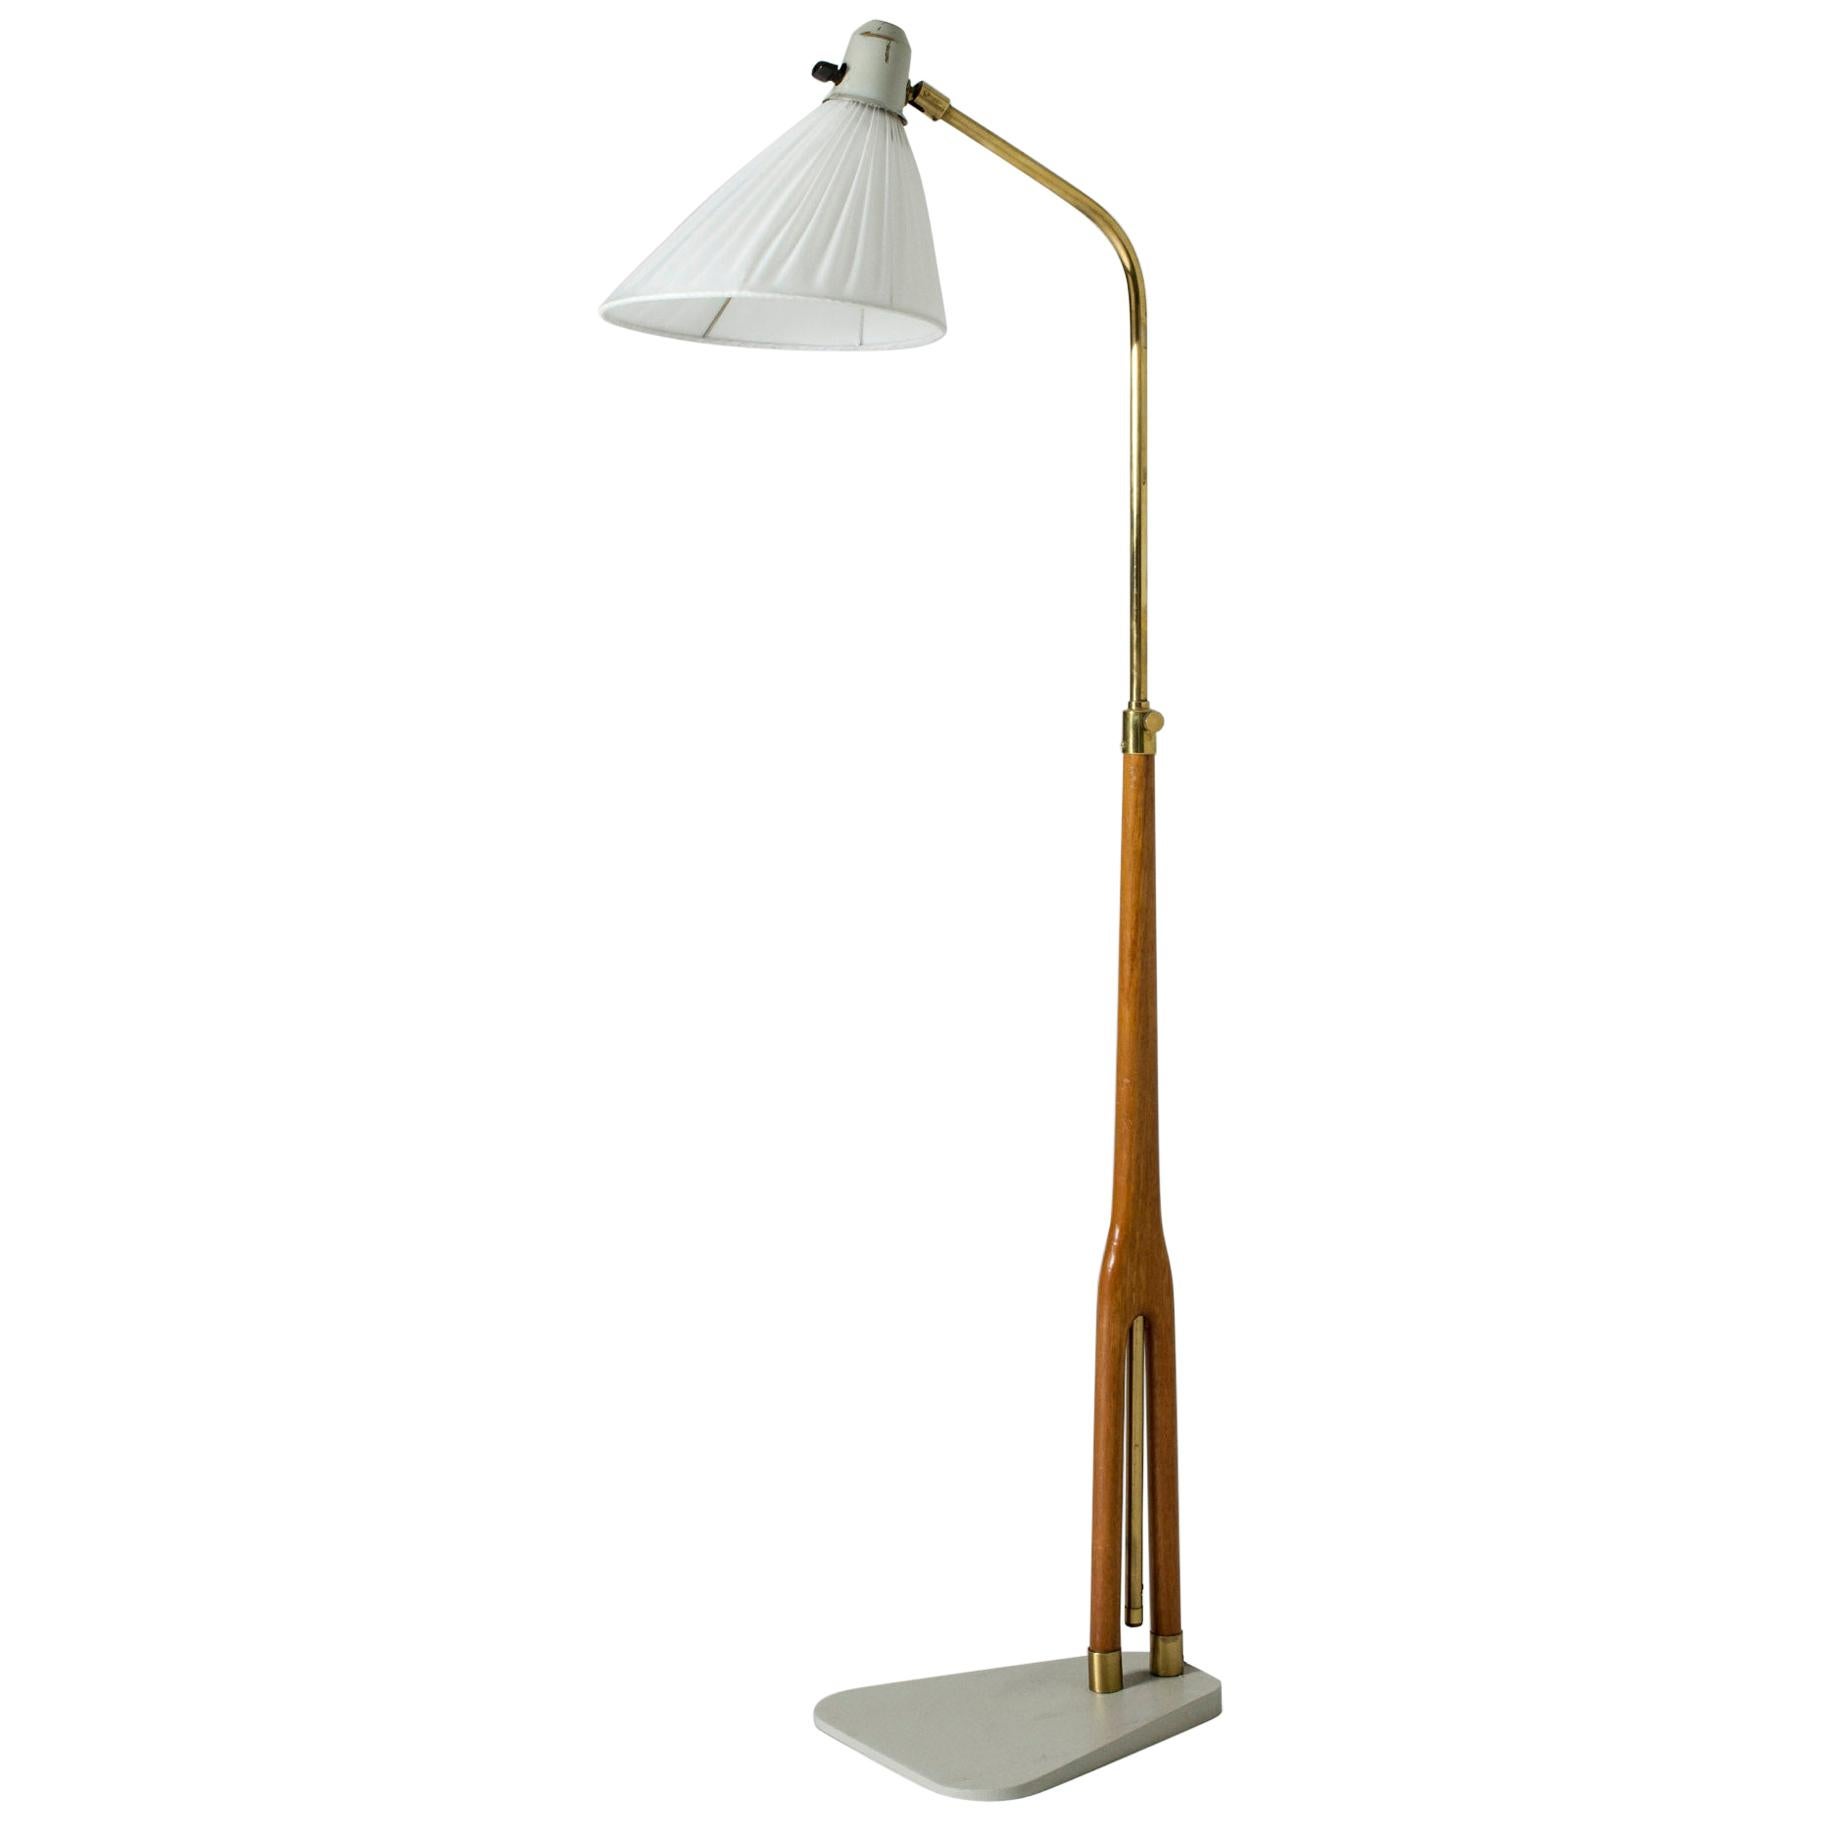 Wood and Brass Floor Lamp from Asea, Sweden